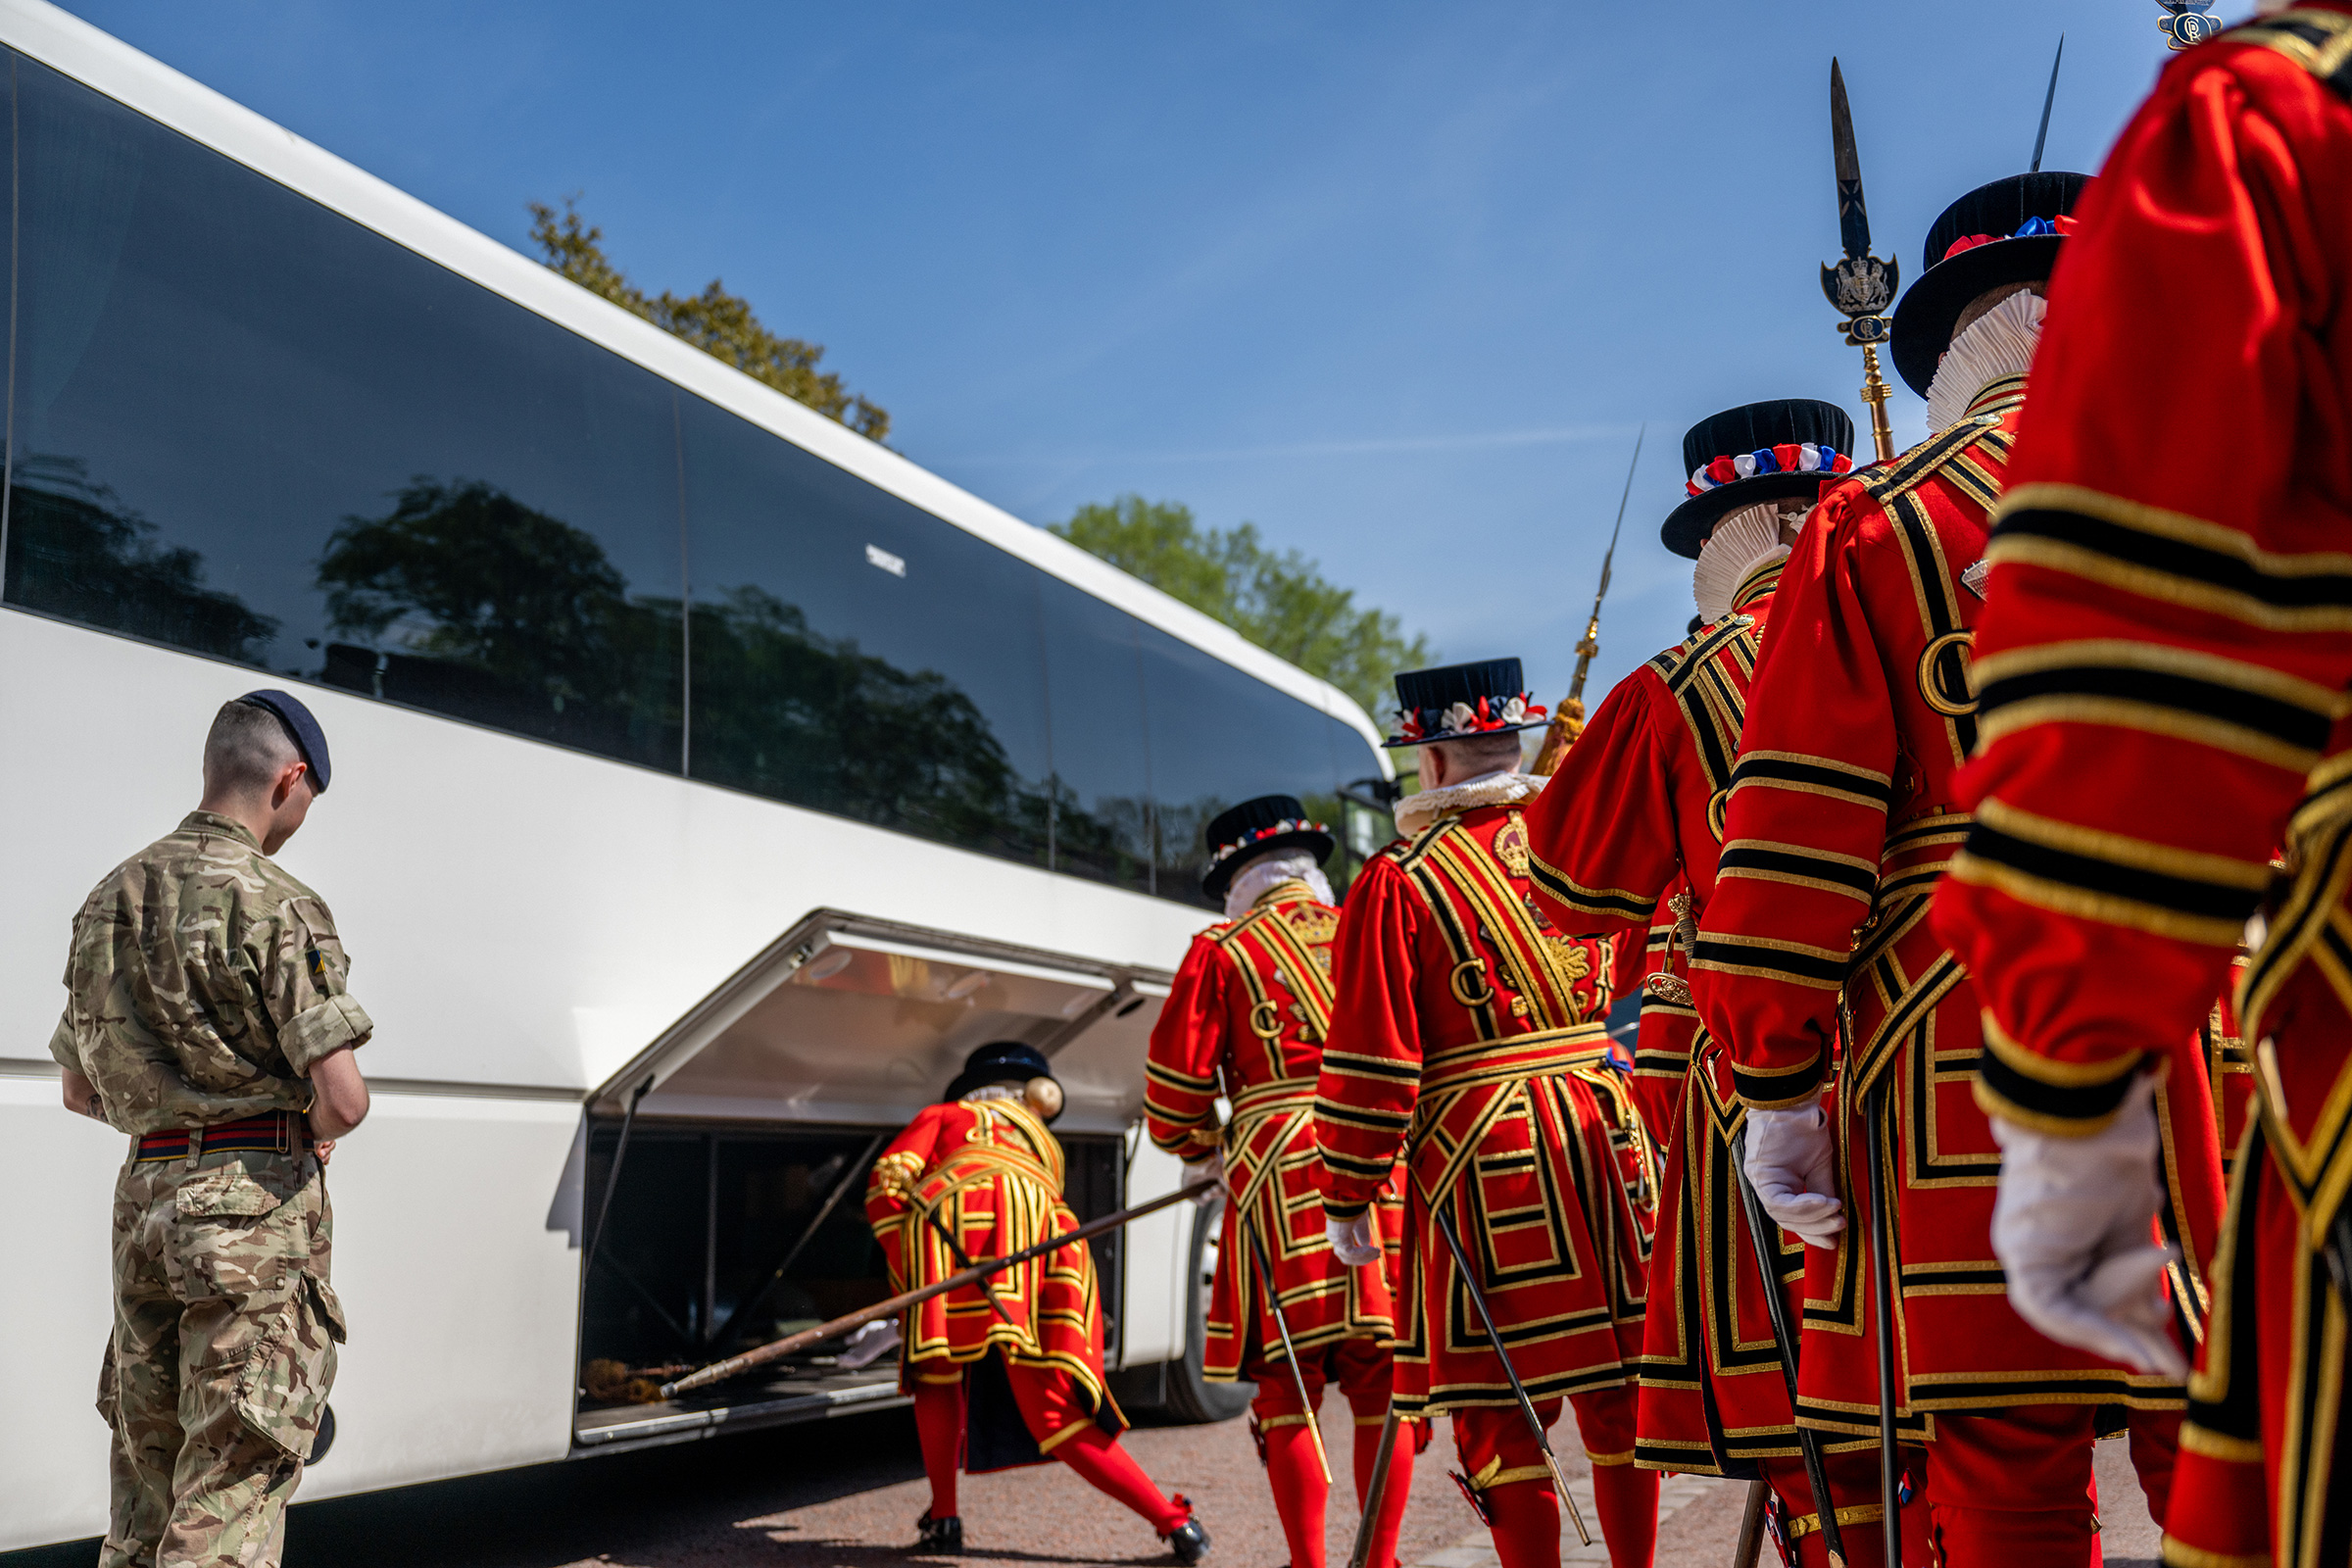 Yeoman of the Guard prepare to board a coach bus on May 3. (Brandon Bell—Getty Images)